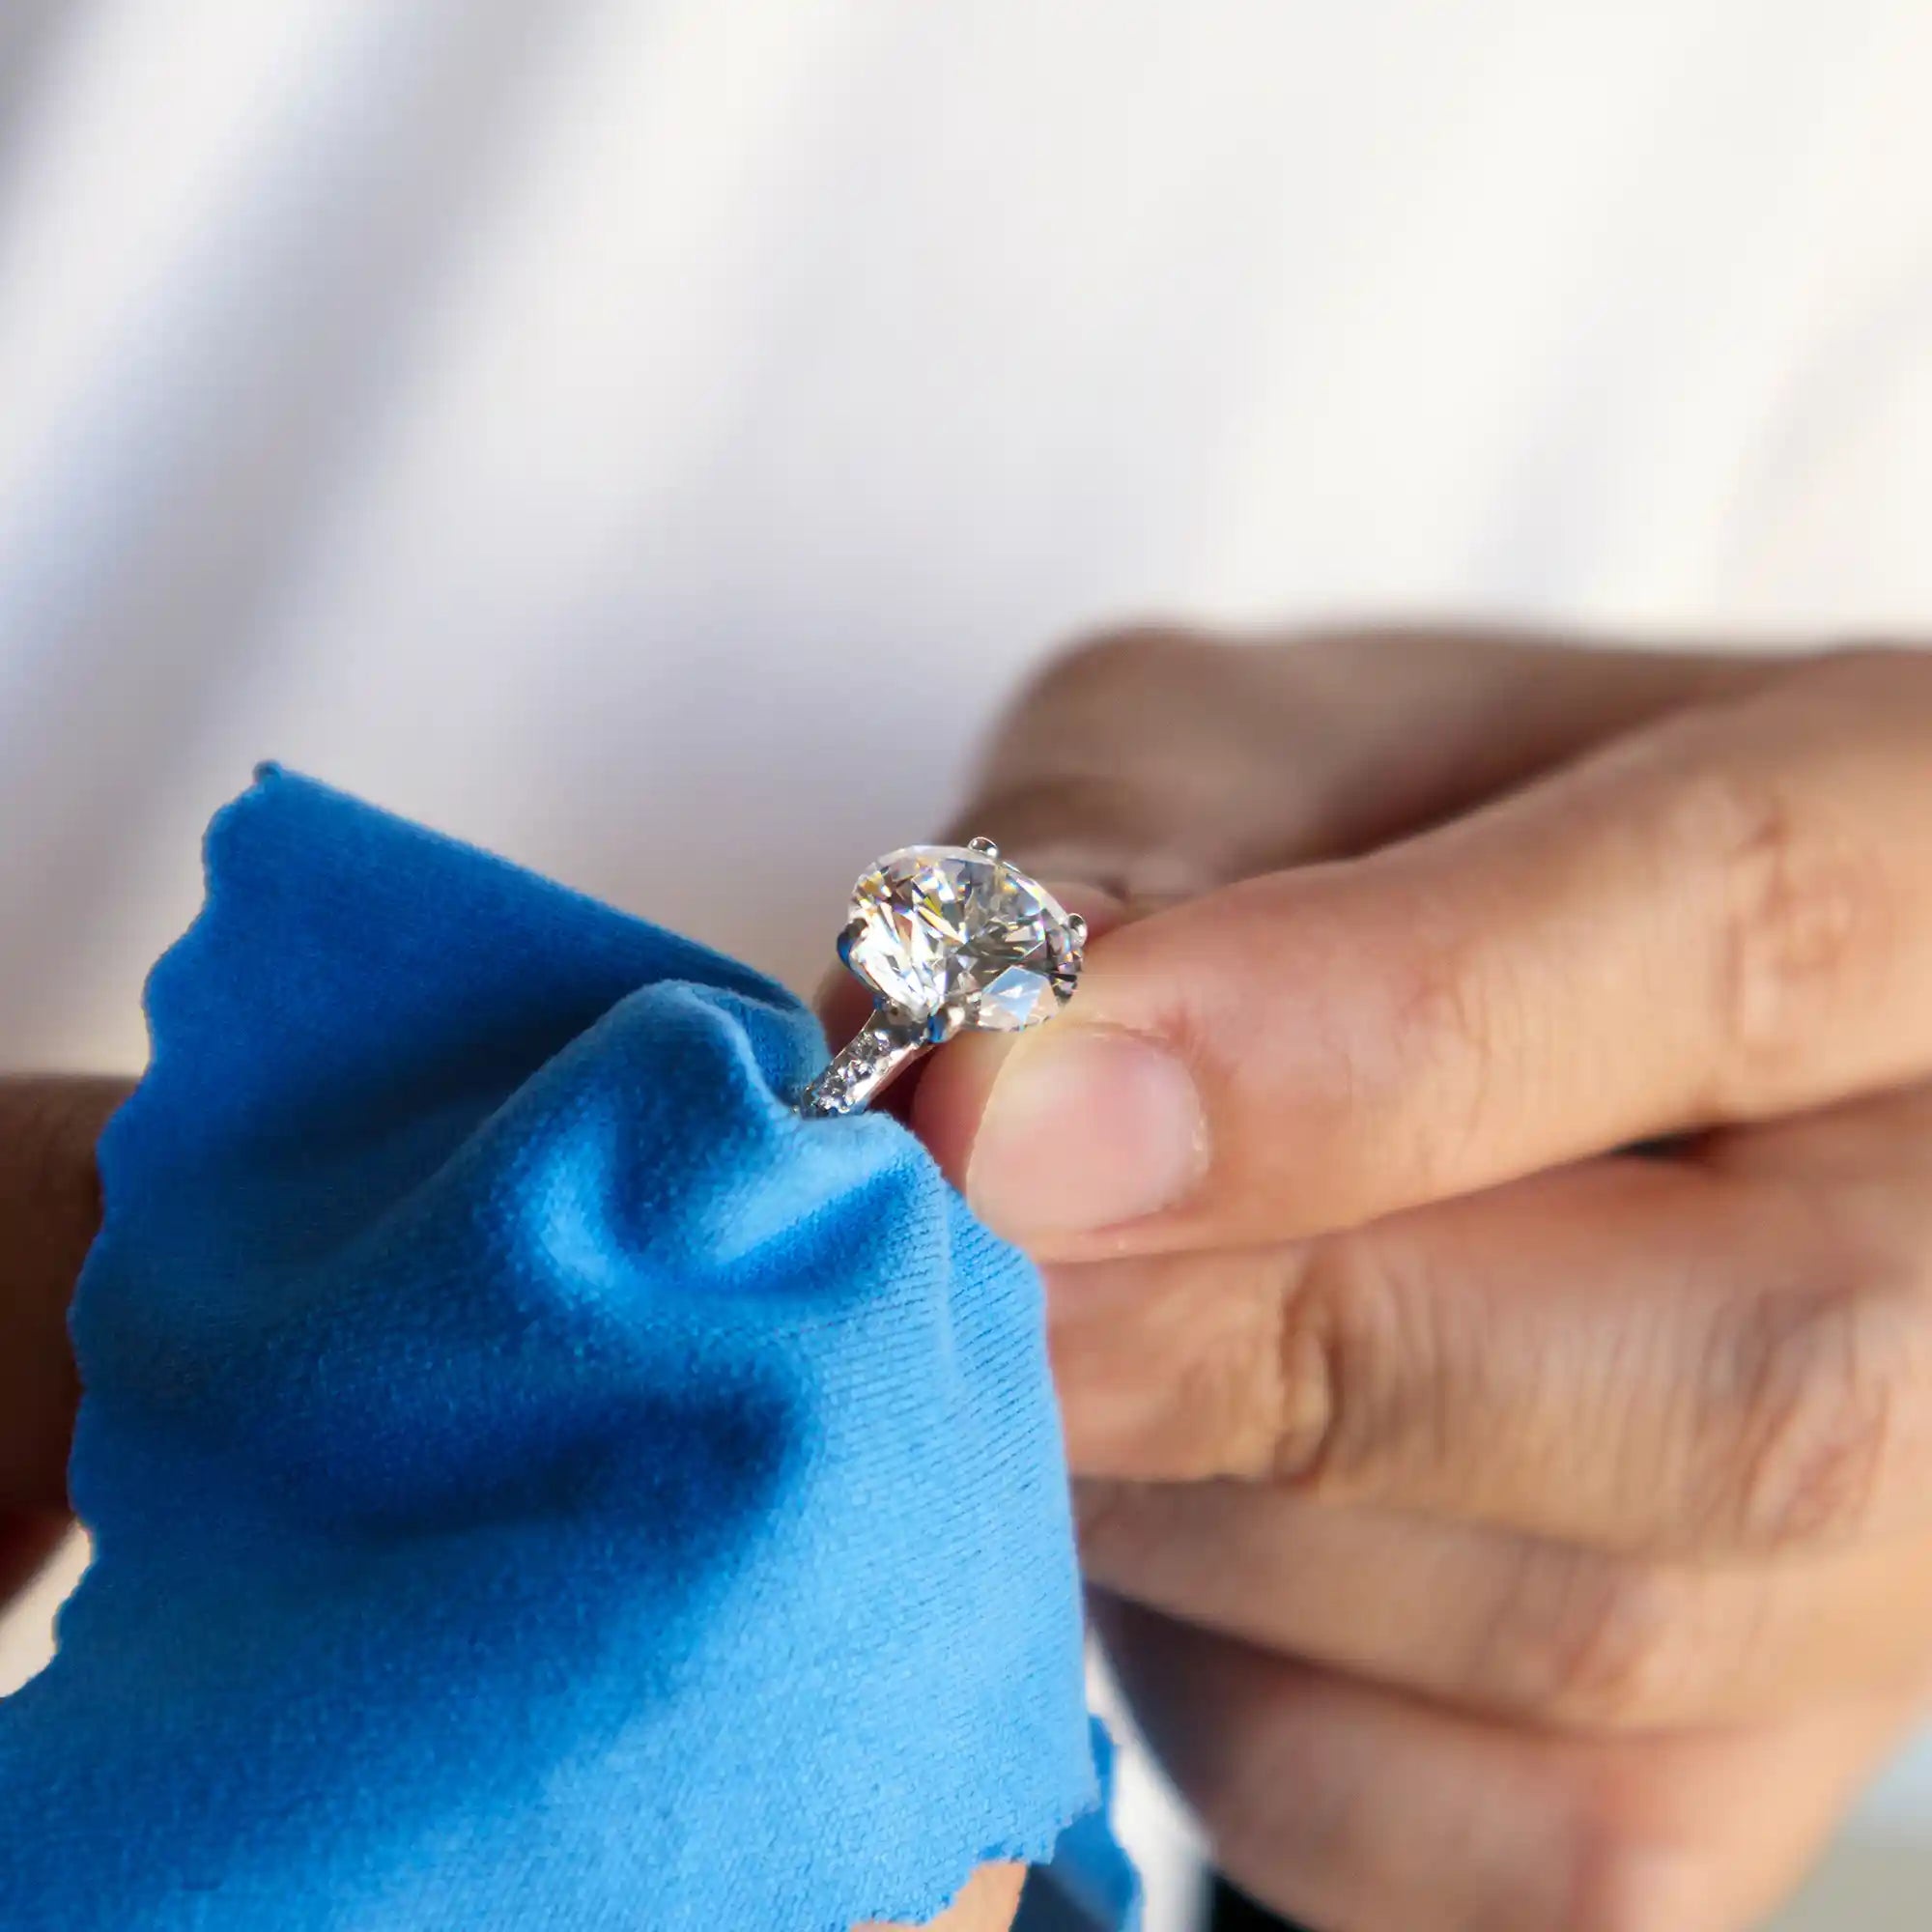 Soft cloth gentle scrubbing the diamond jewelry for a perfect cleaning and debris removing